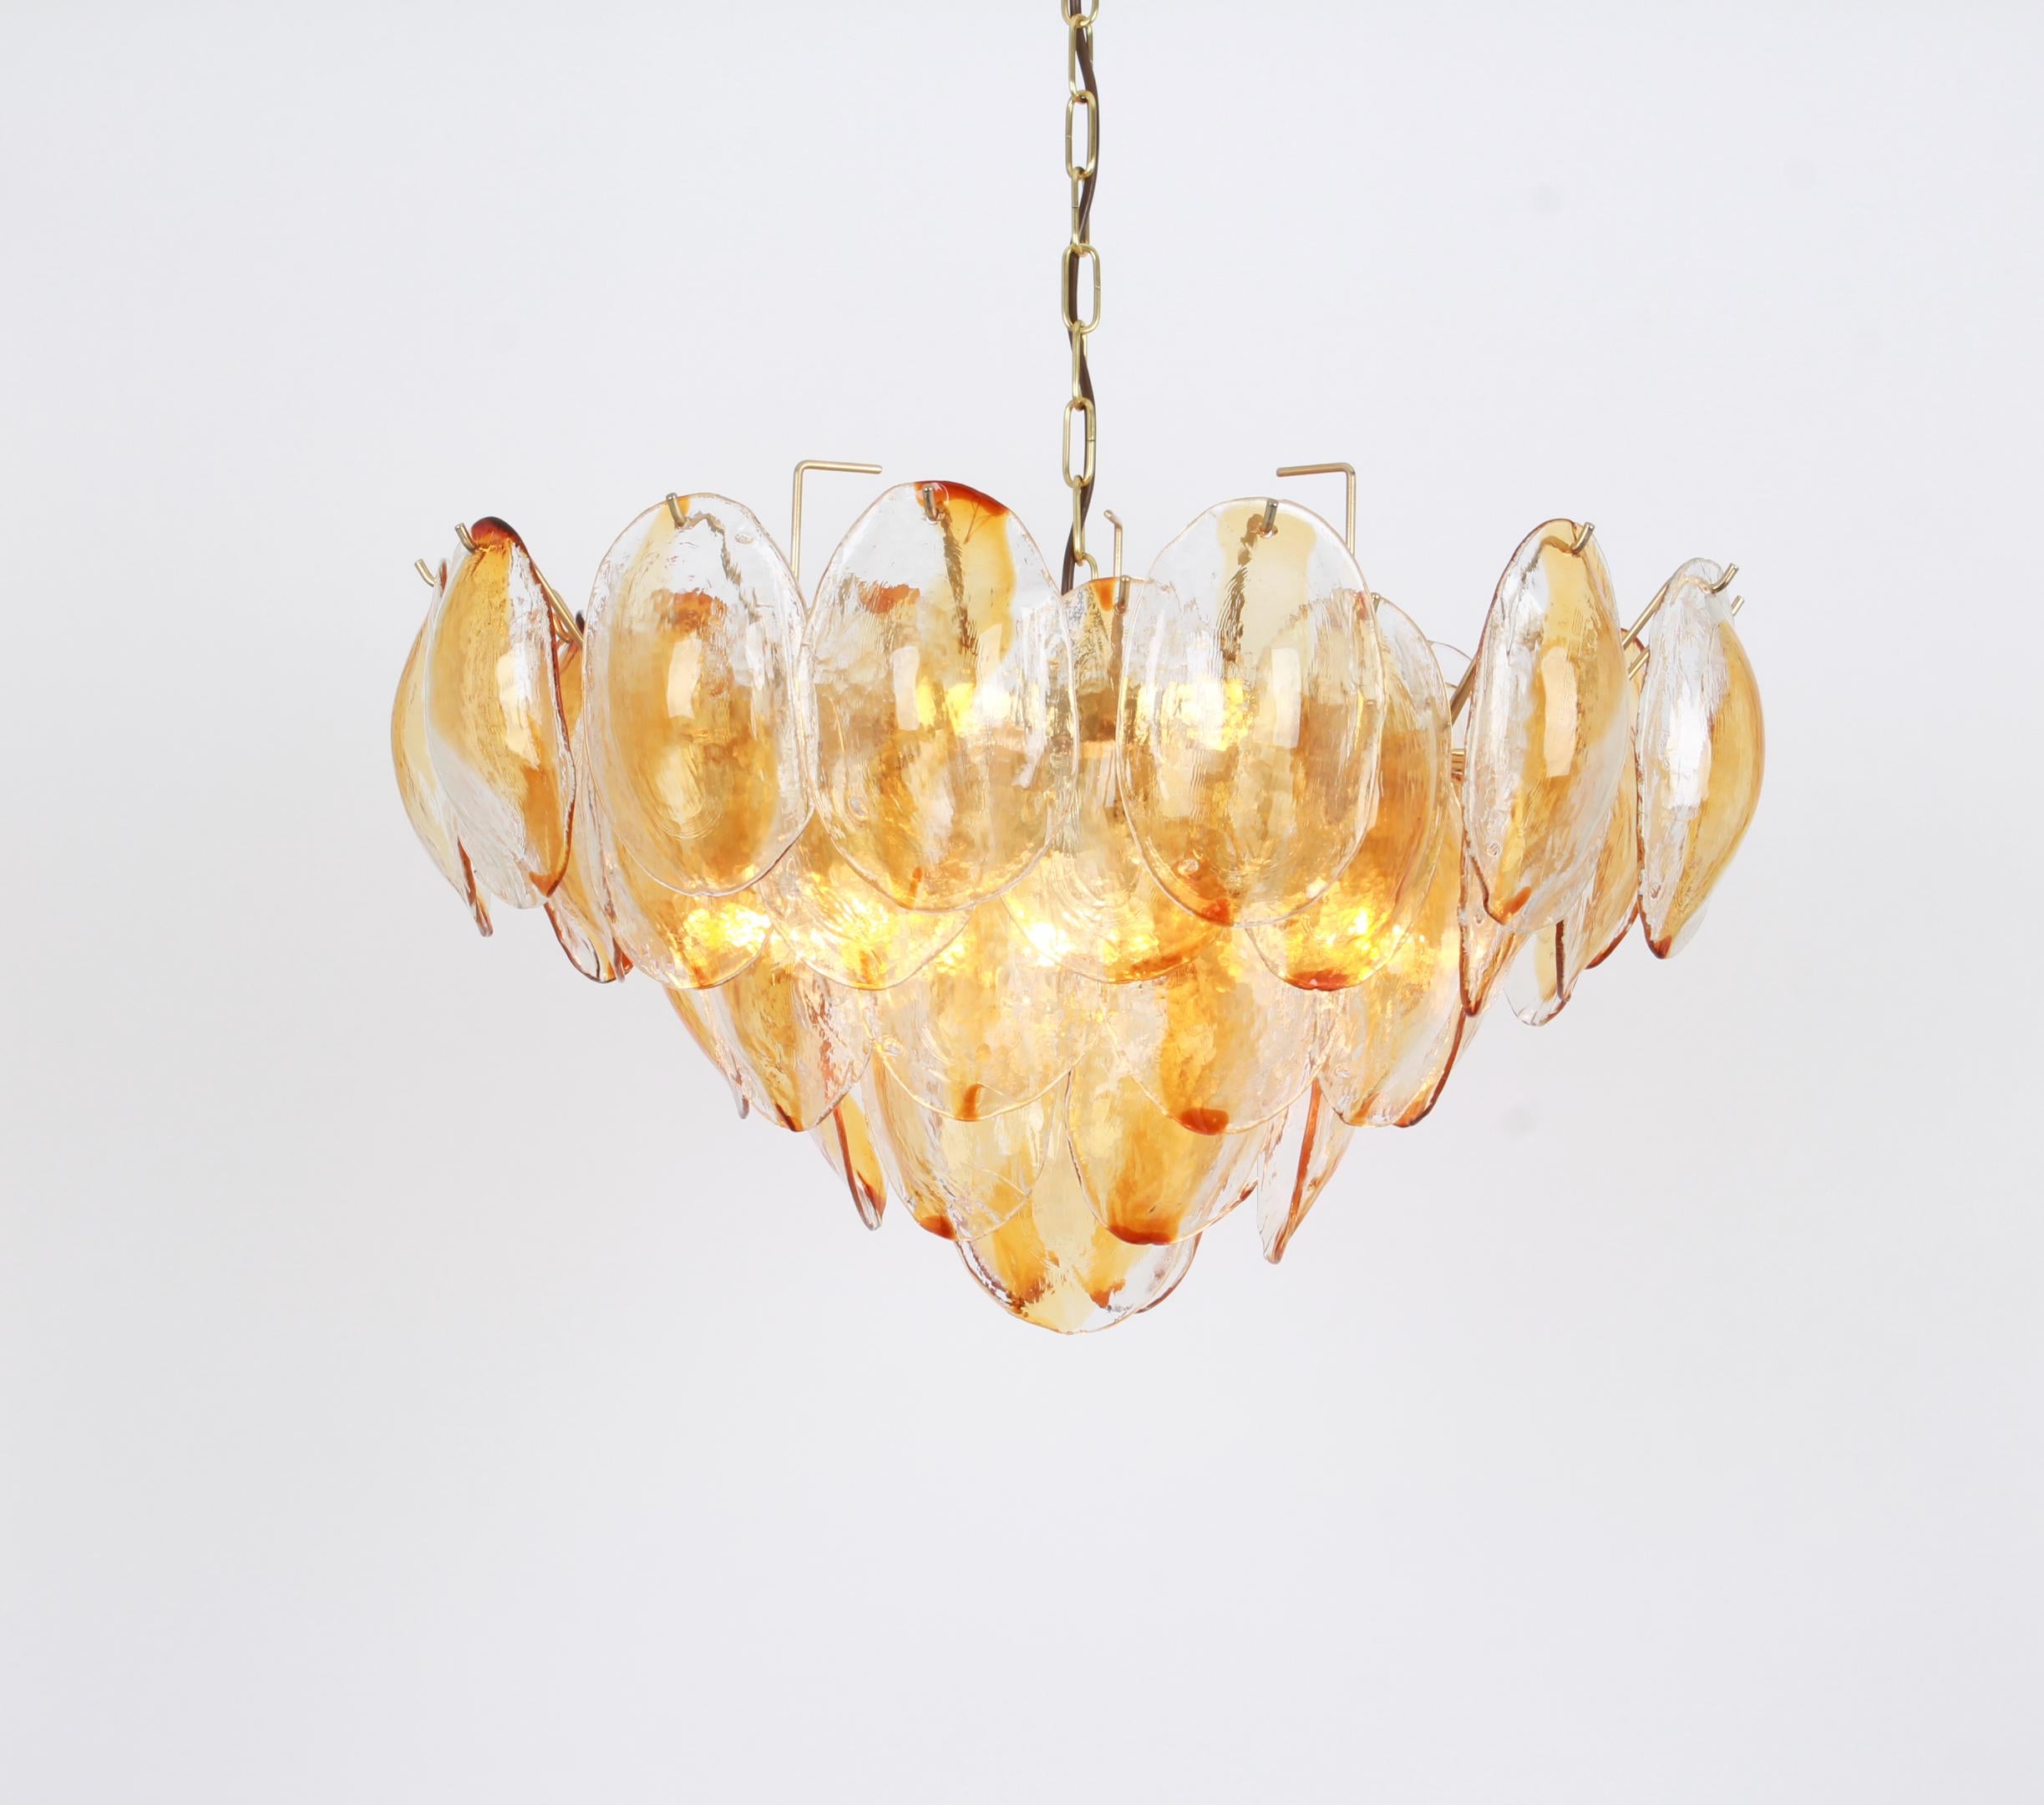 Austrian Large Murano Glass Chandelier Leaves Form by Mazzega, Italy, 1970s